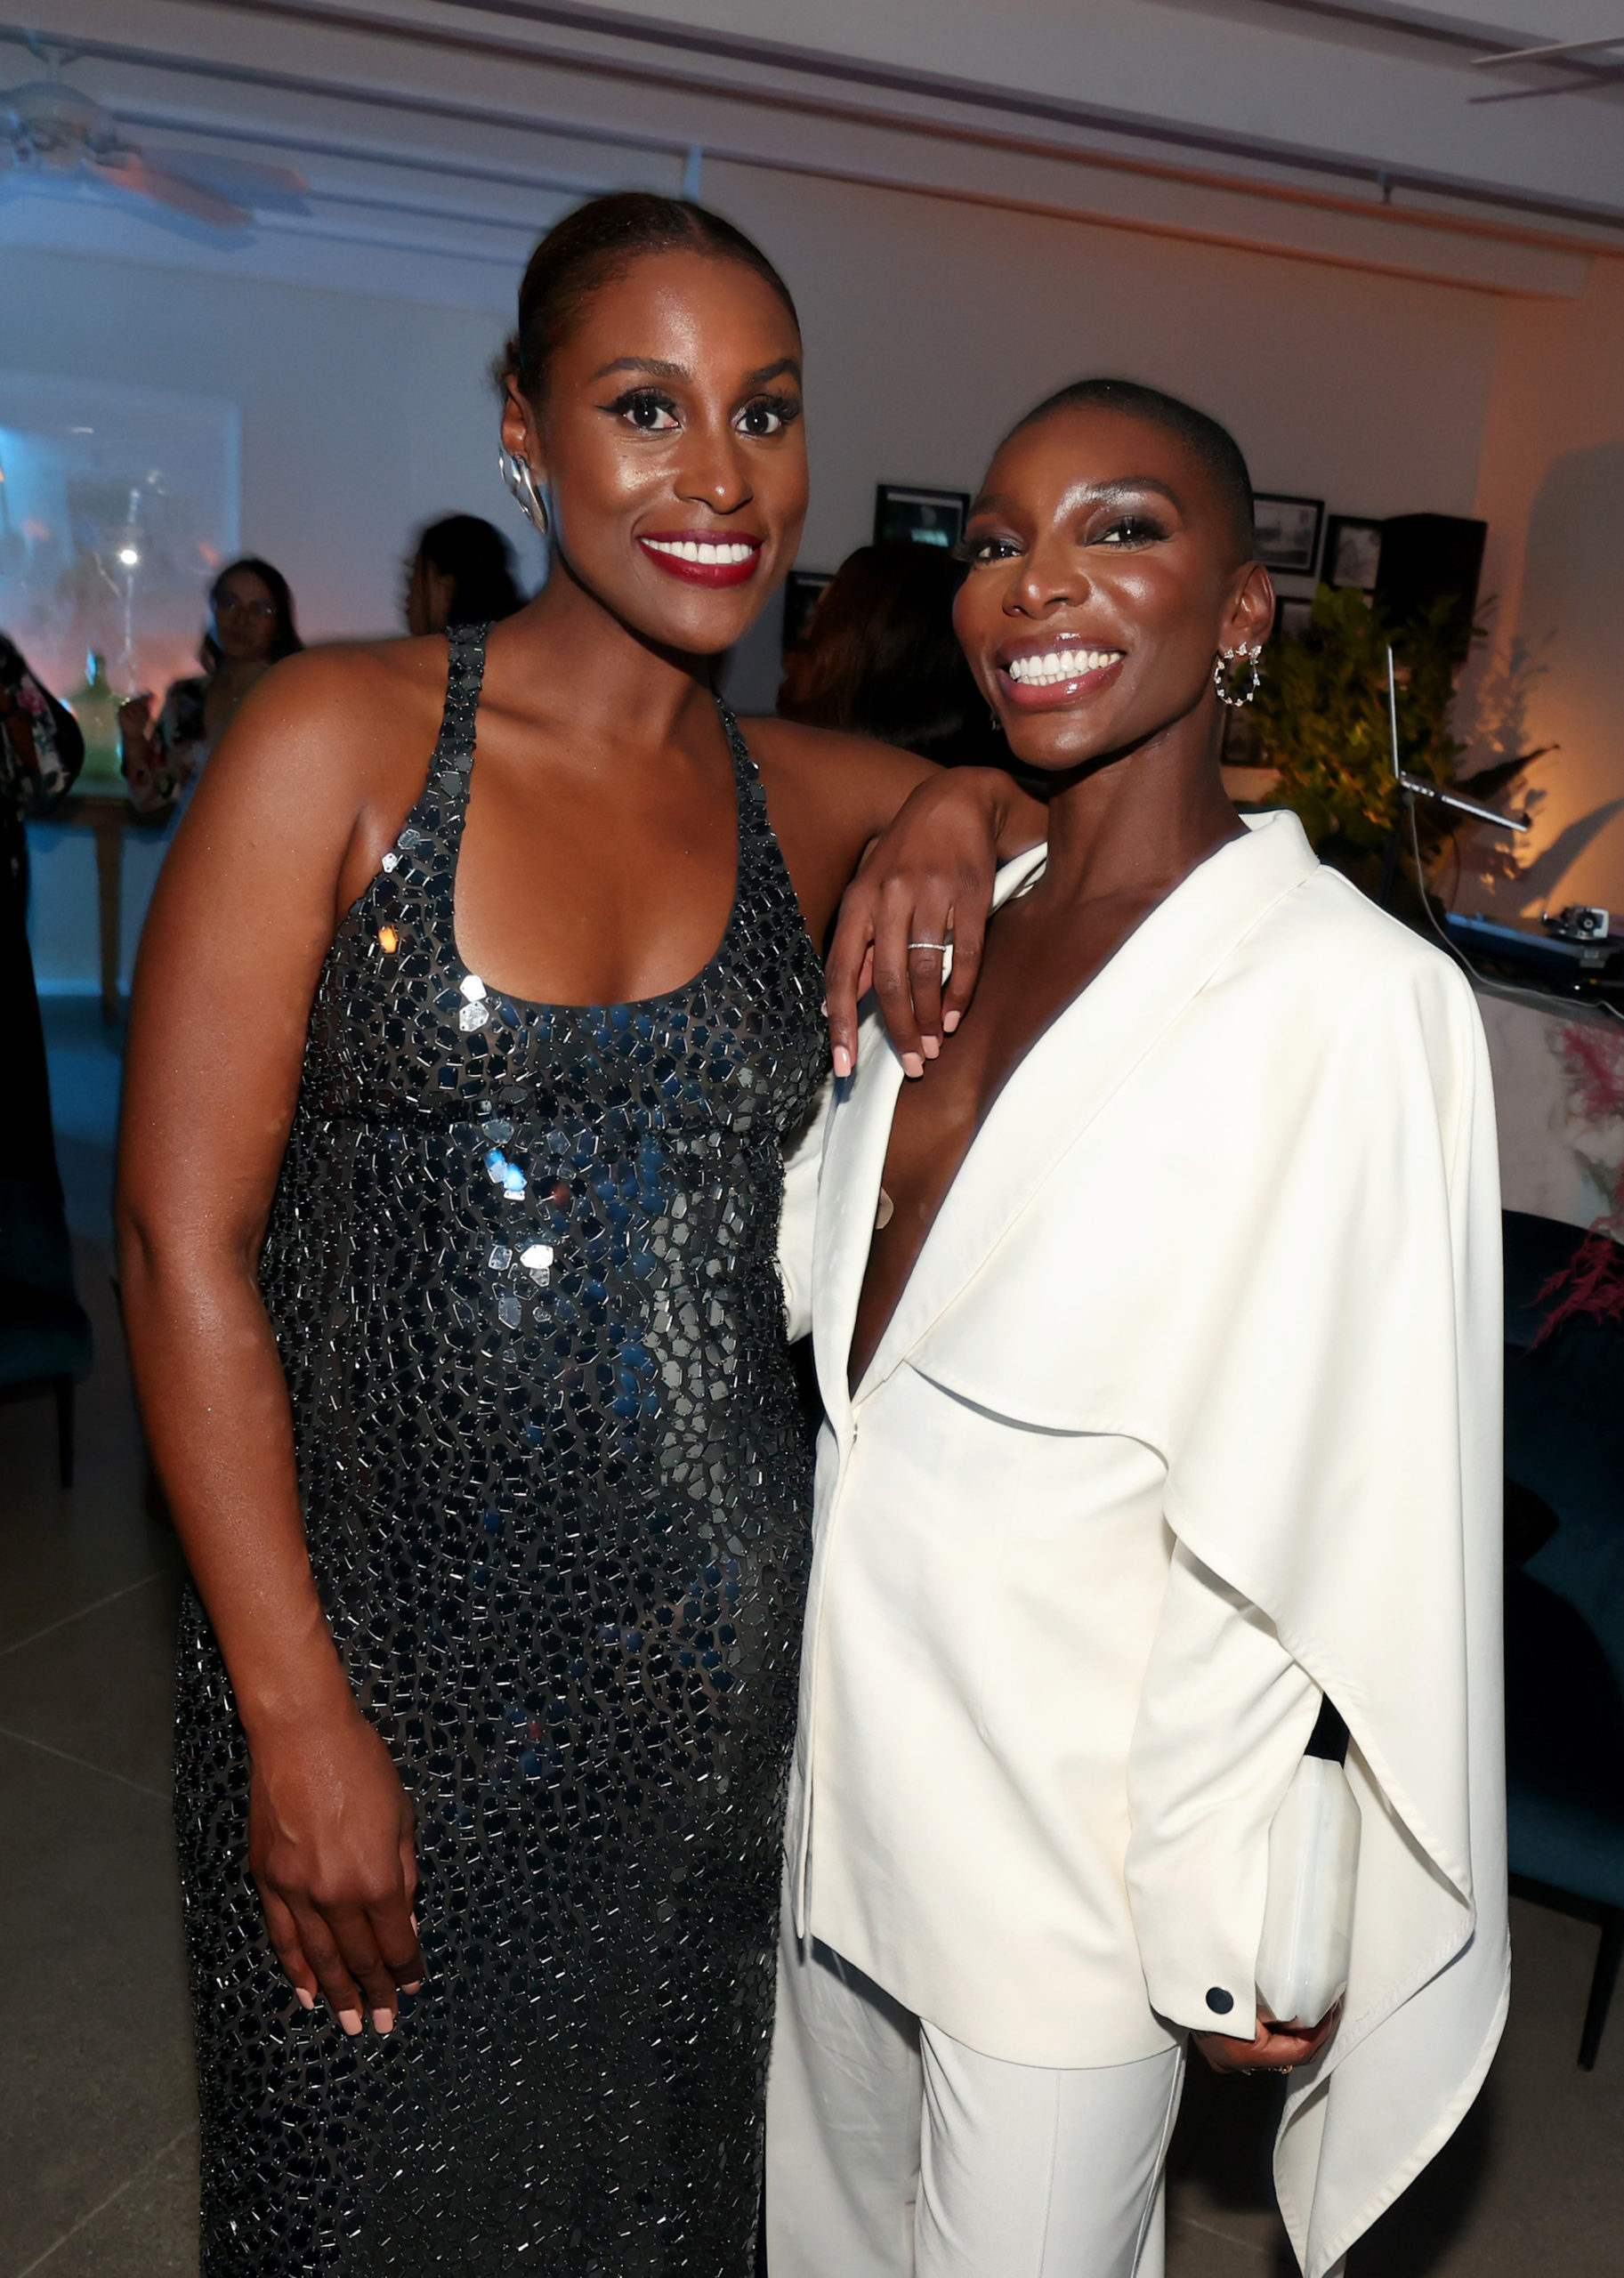 Issa Rae and Michaela Coel at the HBO/ HBO Max Post Emmys Reception.